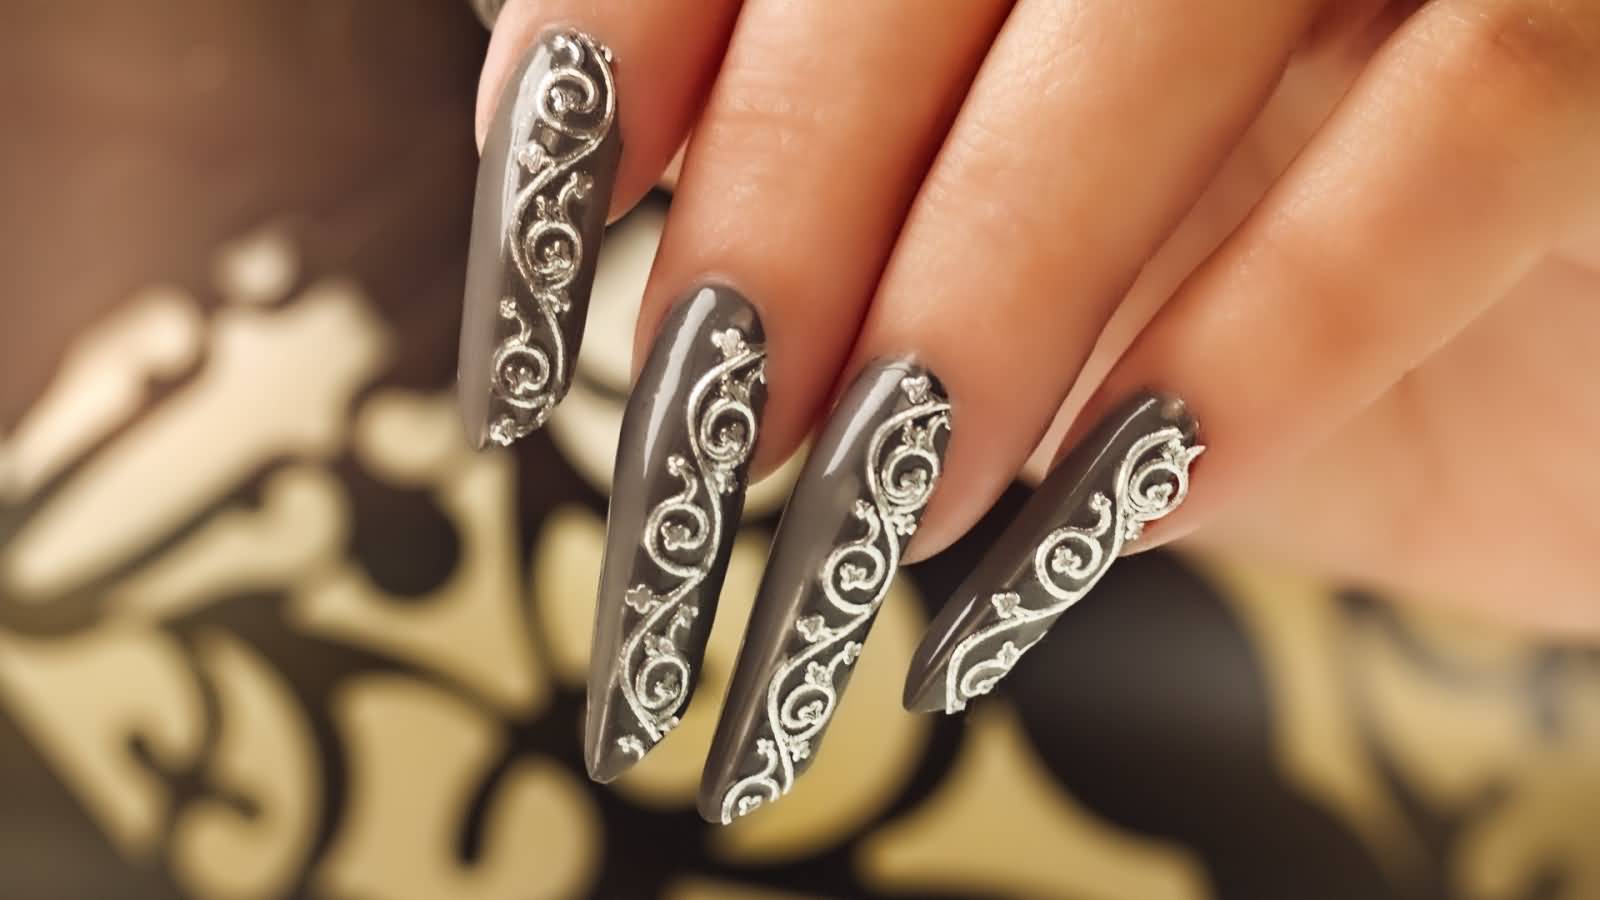 Grey Long Edge Nails Art With Decal 3D Nails